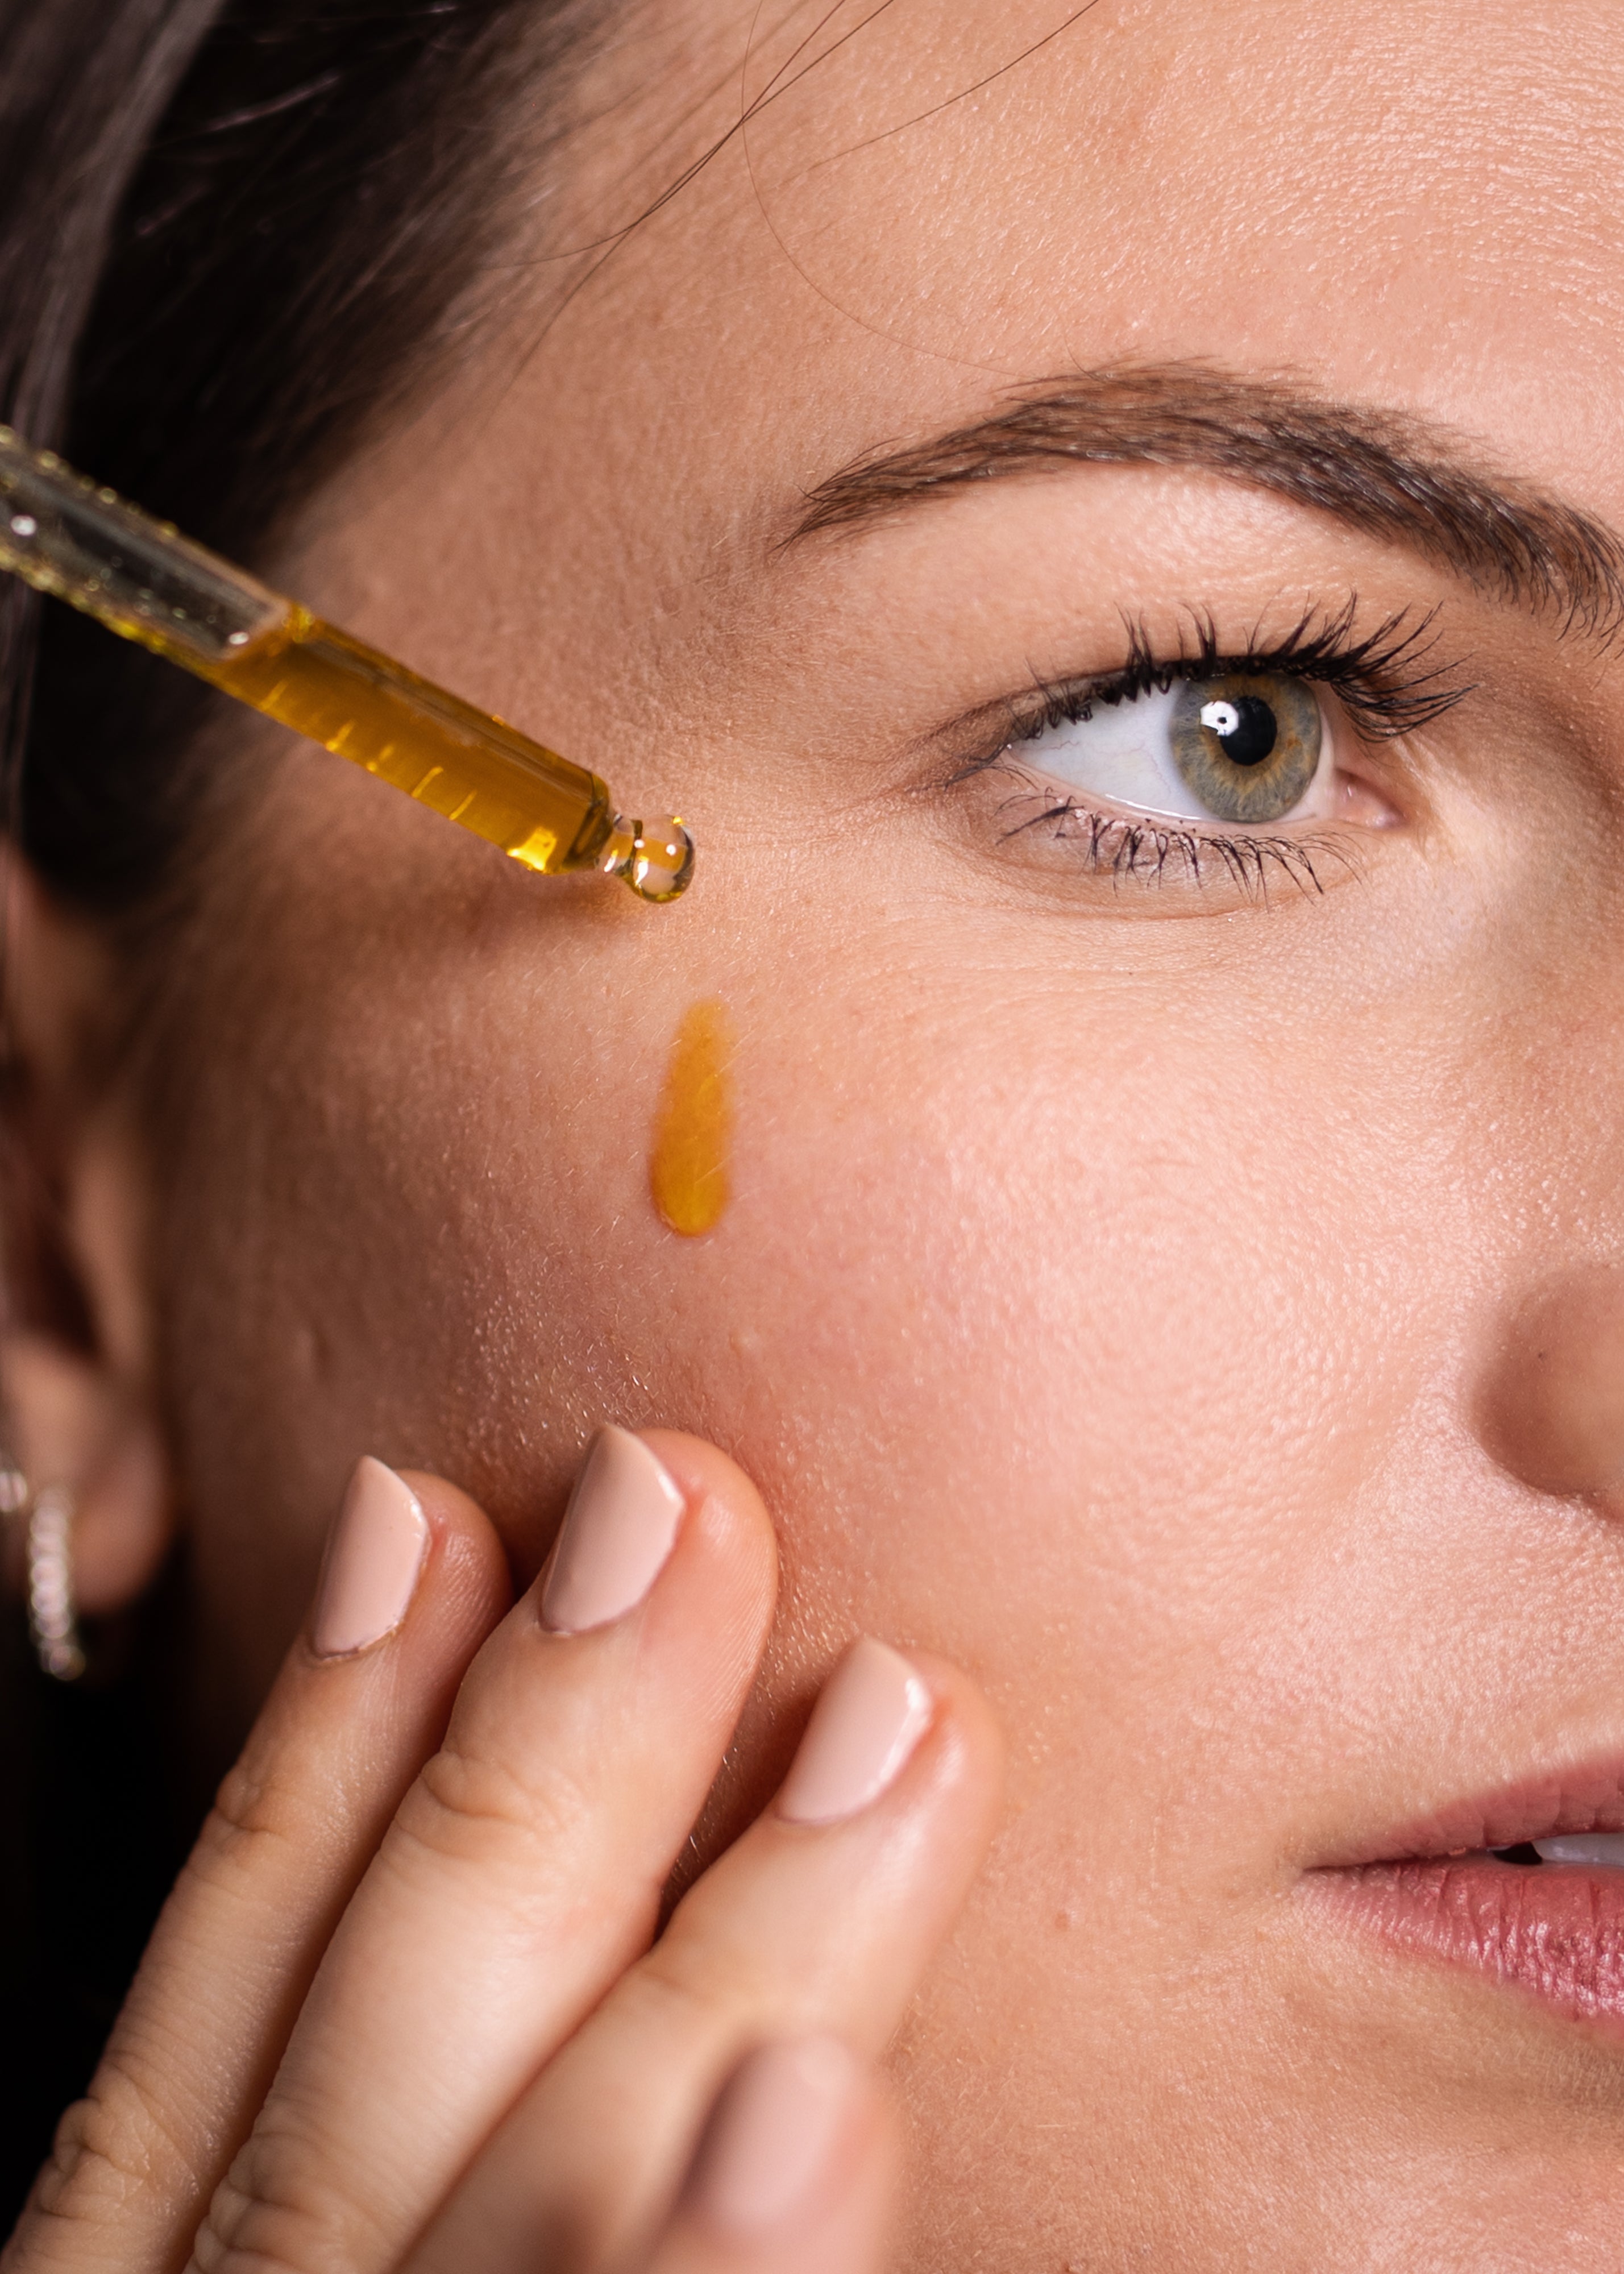 How to integrate an Oil into your skincare routine